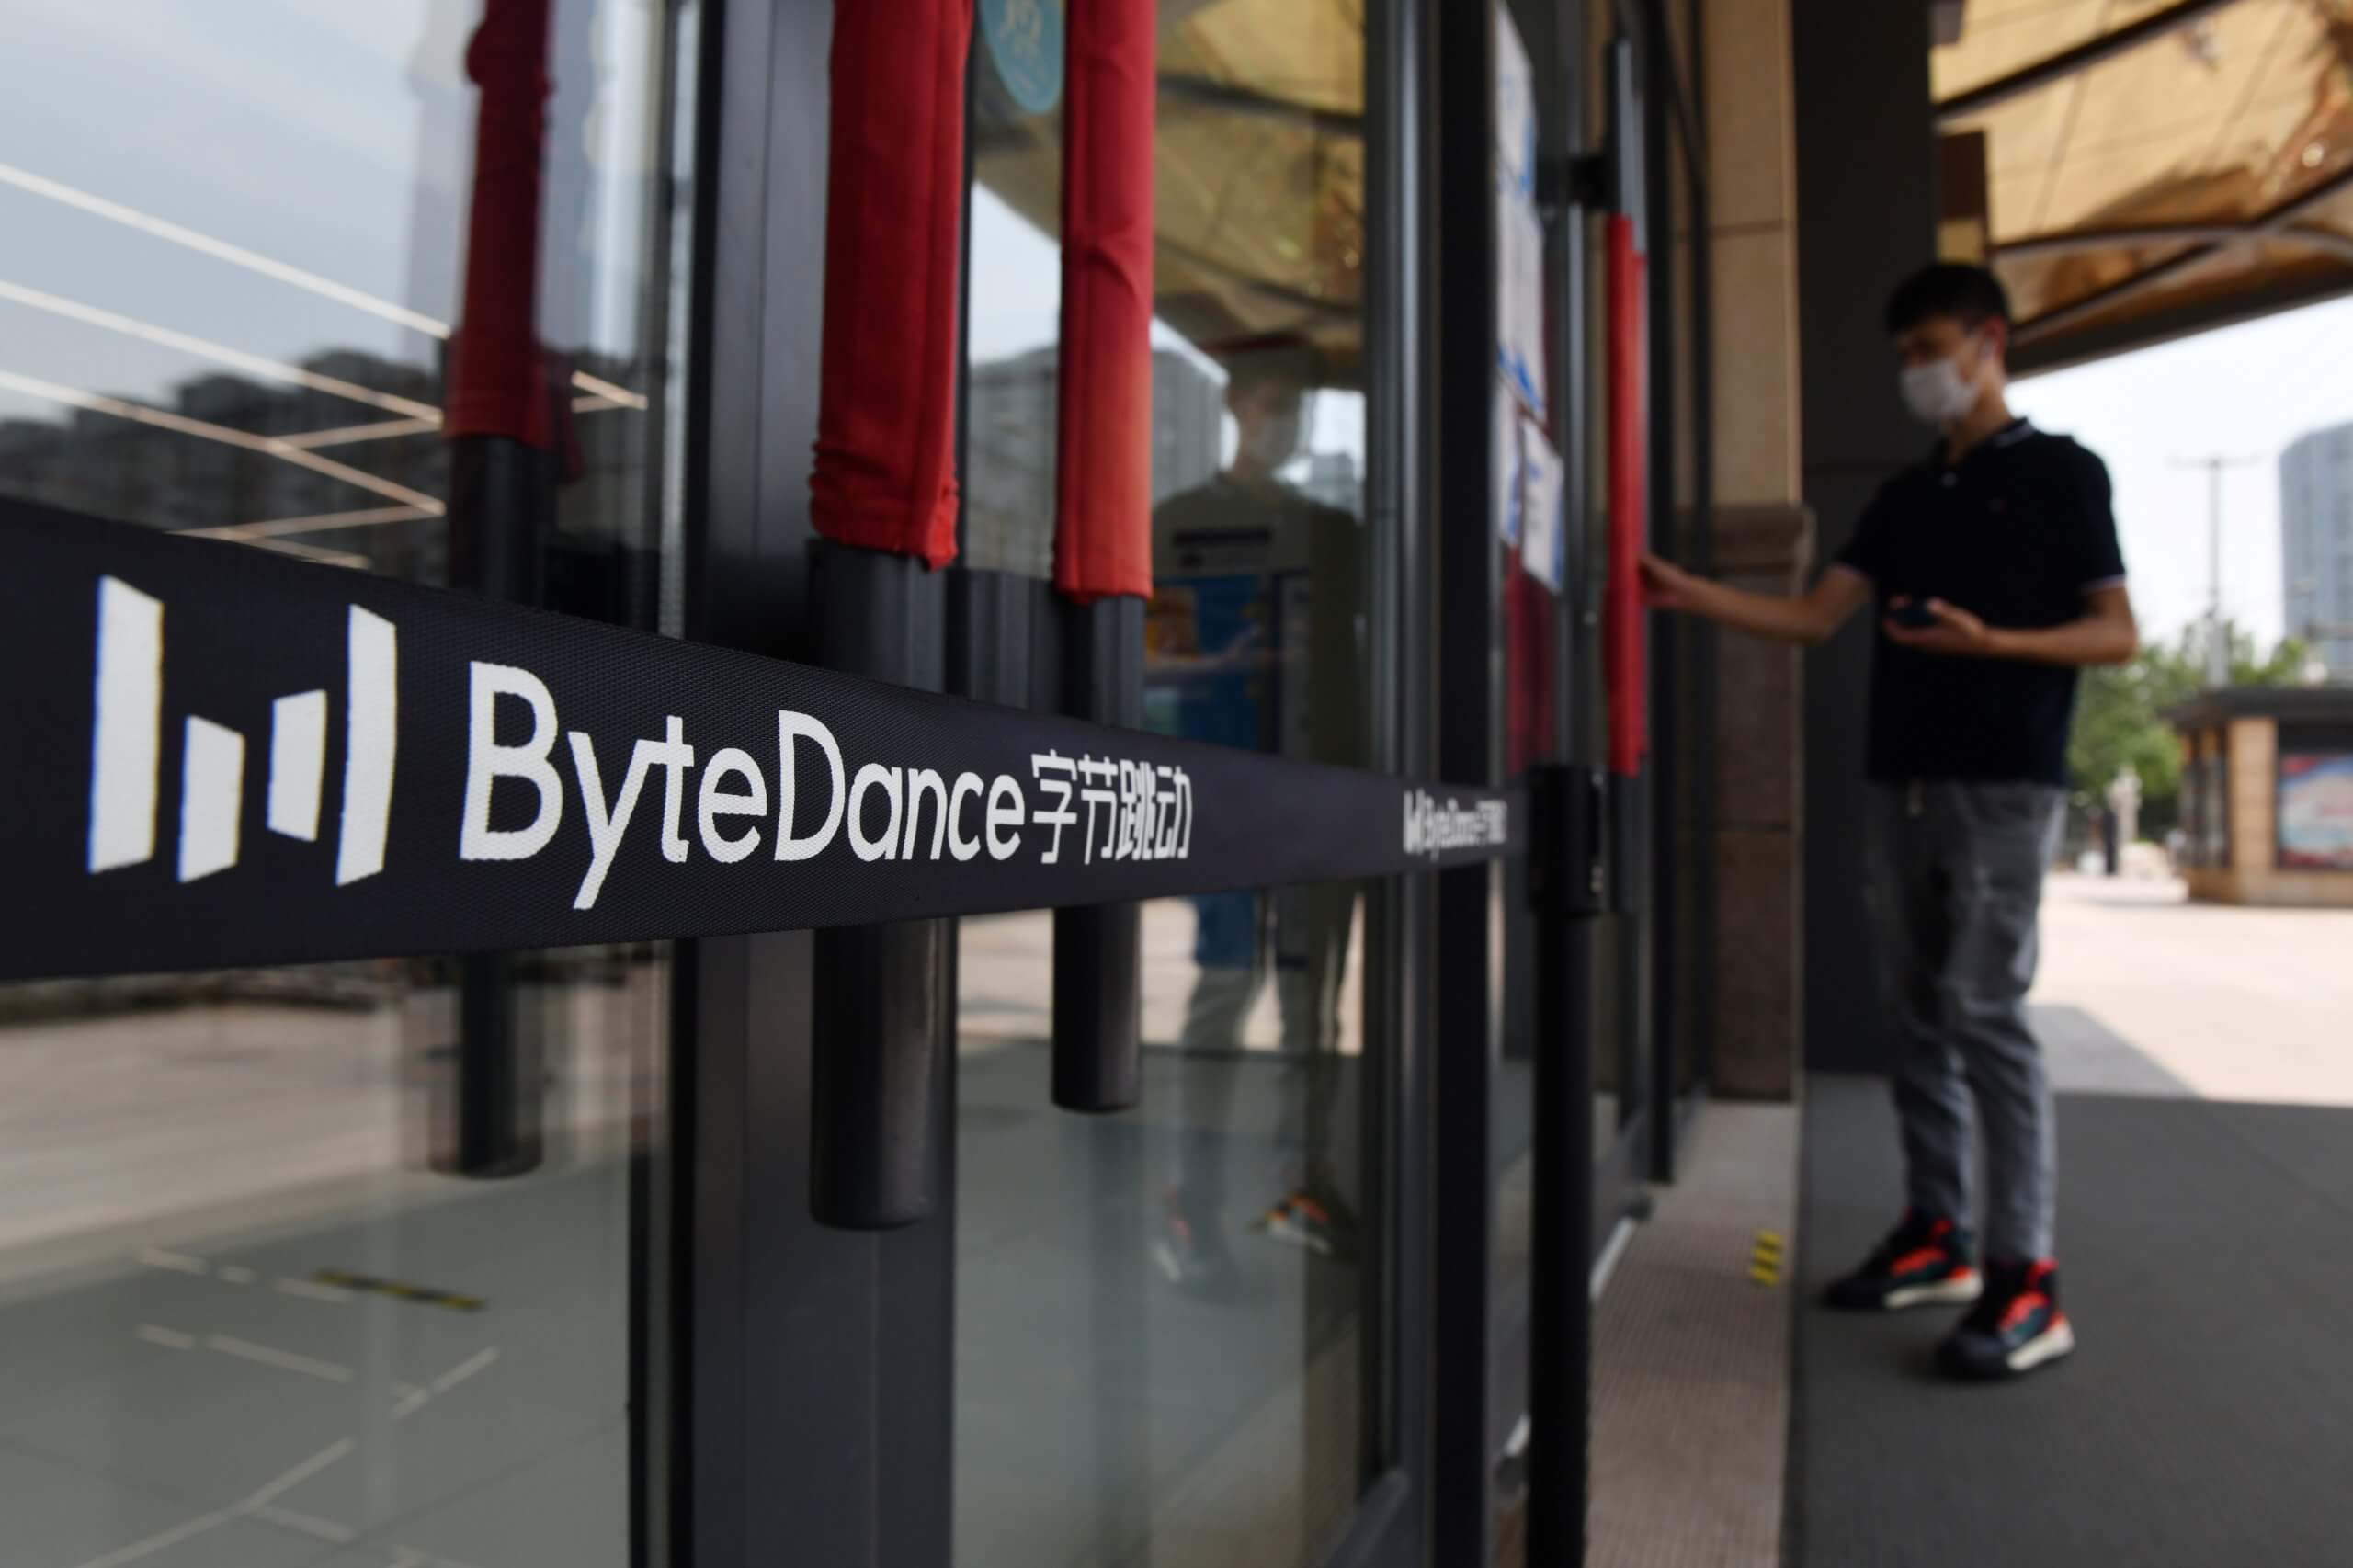 The ByteDance logo is seen at the entrance to a ByteDance office in Beijing.